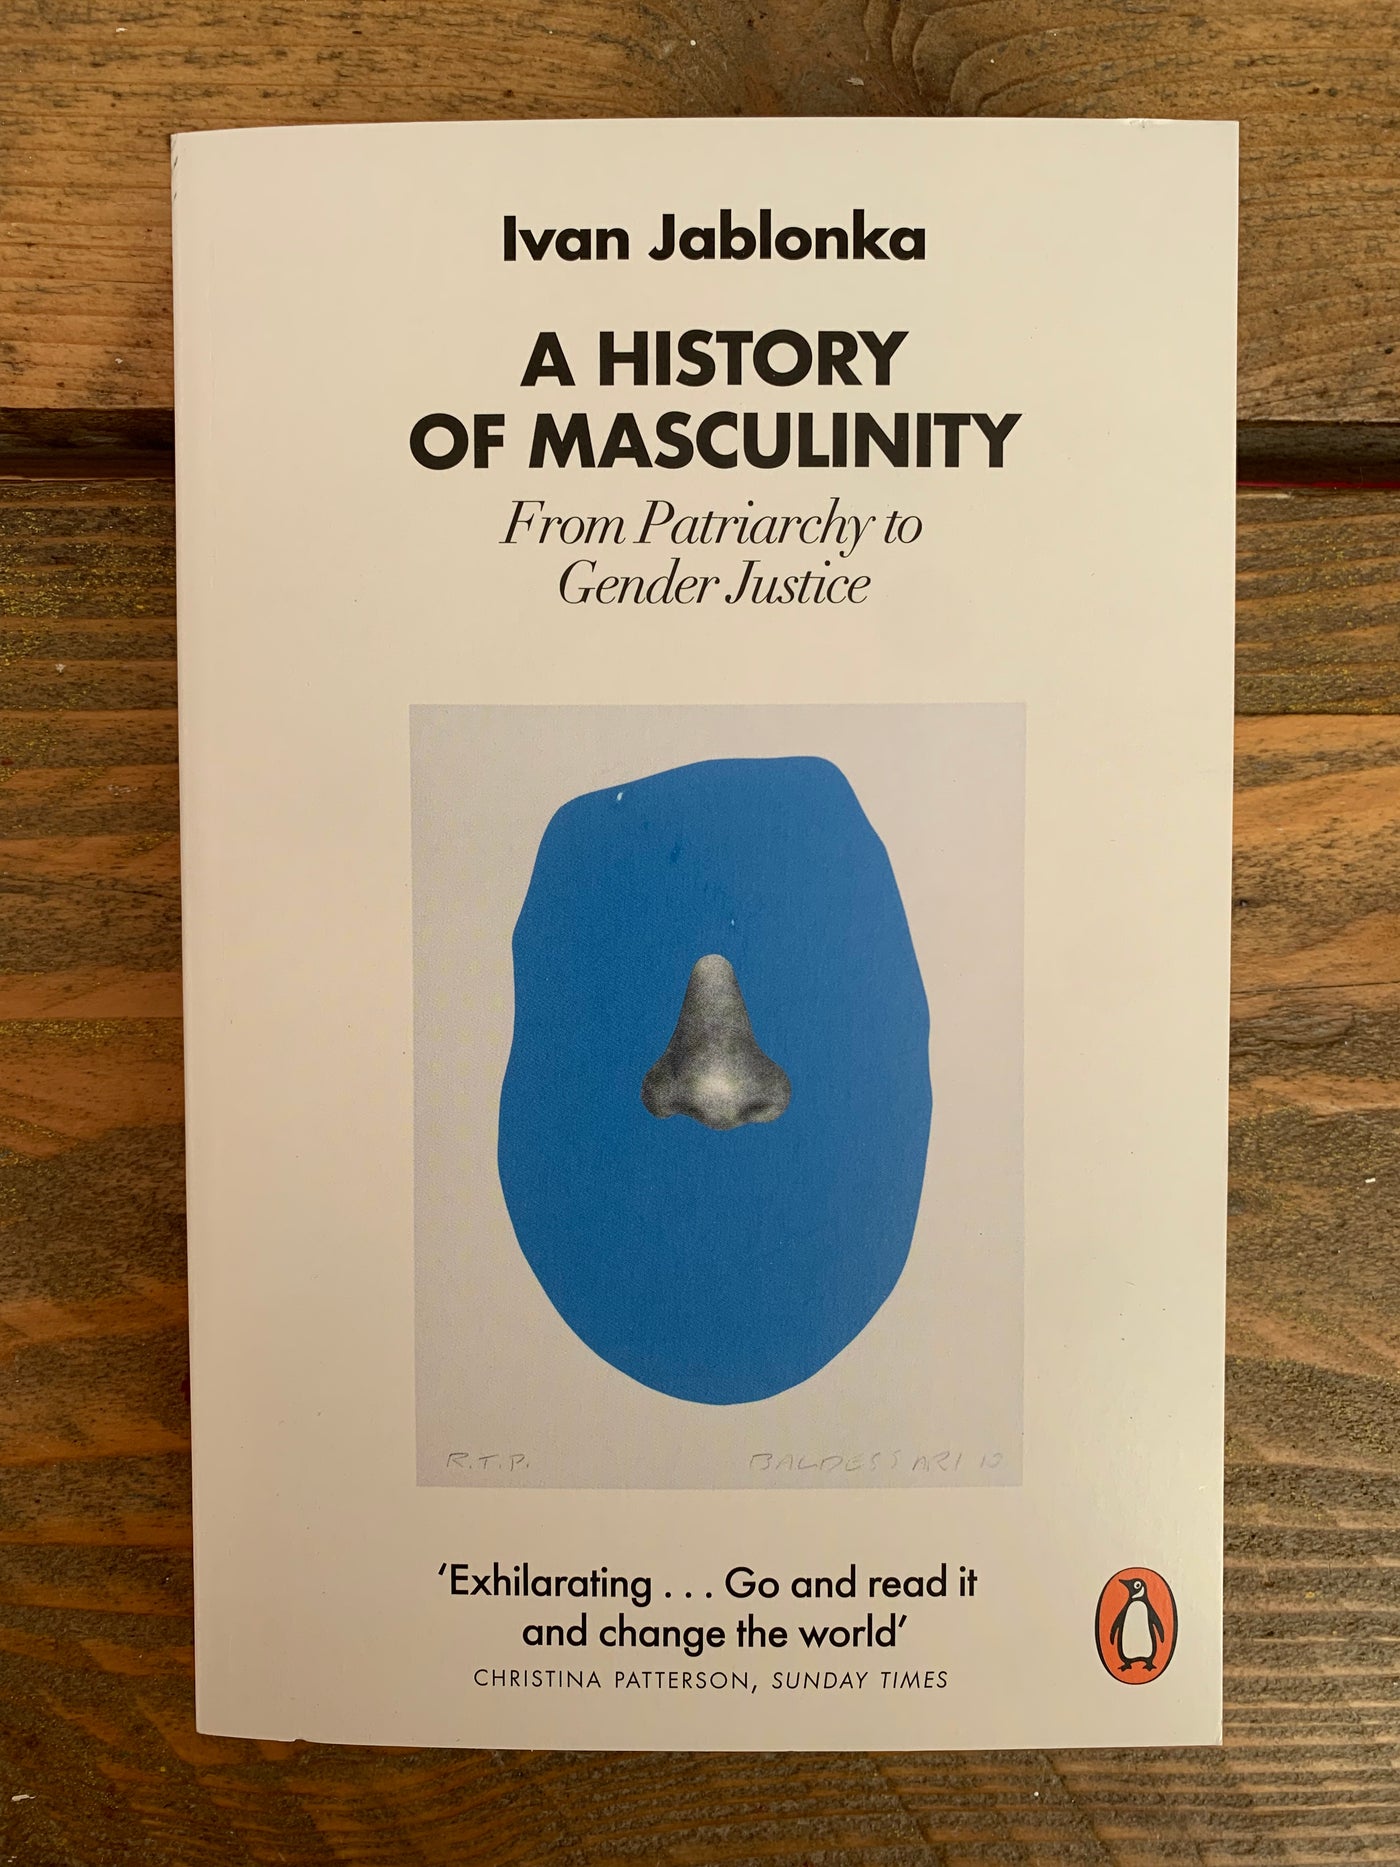 A History of Masculinity